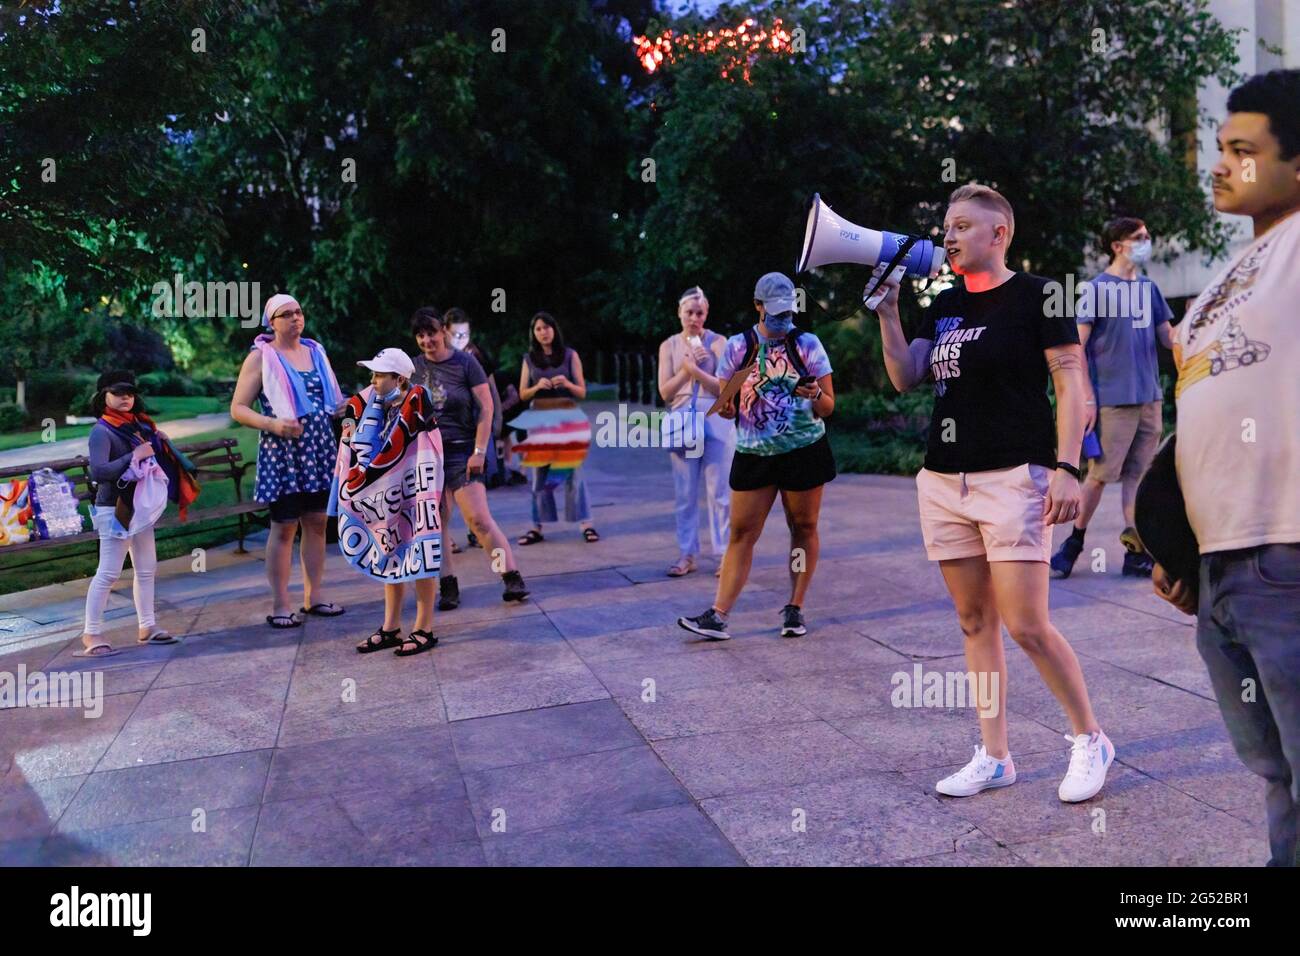 Lena Tenney, 29, of North Linden speaks on a megaphone during a night time rally against legislation that would ban transgender women from participating in girlís/womenís sports. Transgender rights advocates stood outside of the Ohio Statehouse to oppose and bring attention to an amendment to a bill that would ban transgender women from participating in high school and college women sports. The original bill that this transgender ban was added to dealt with compensation for college students to profit off of their name, image and likeness. The addition of transgender ban to this bill was a sur Stock Photo